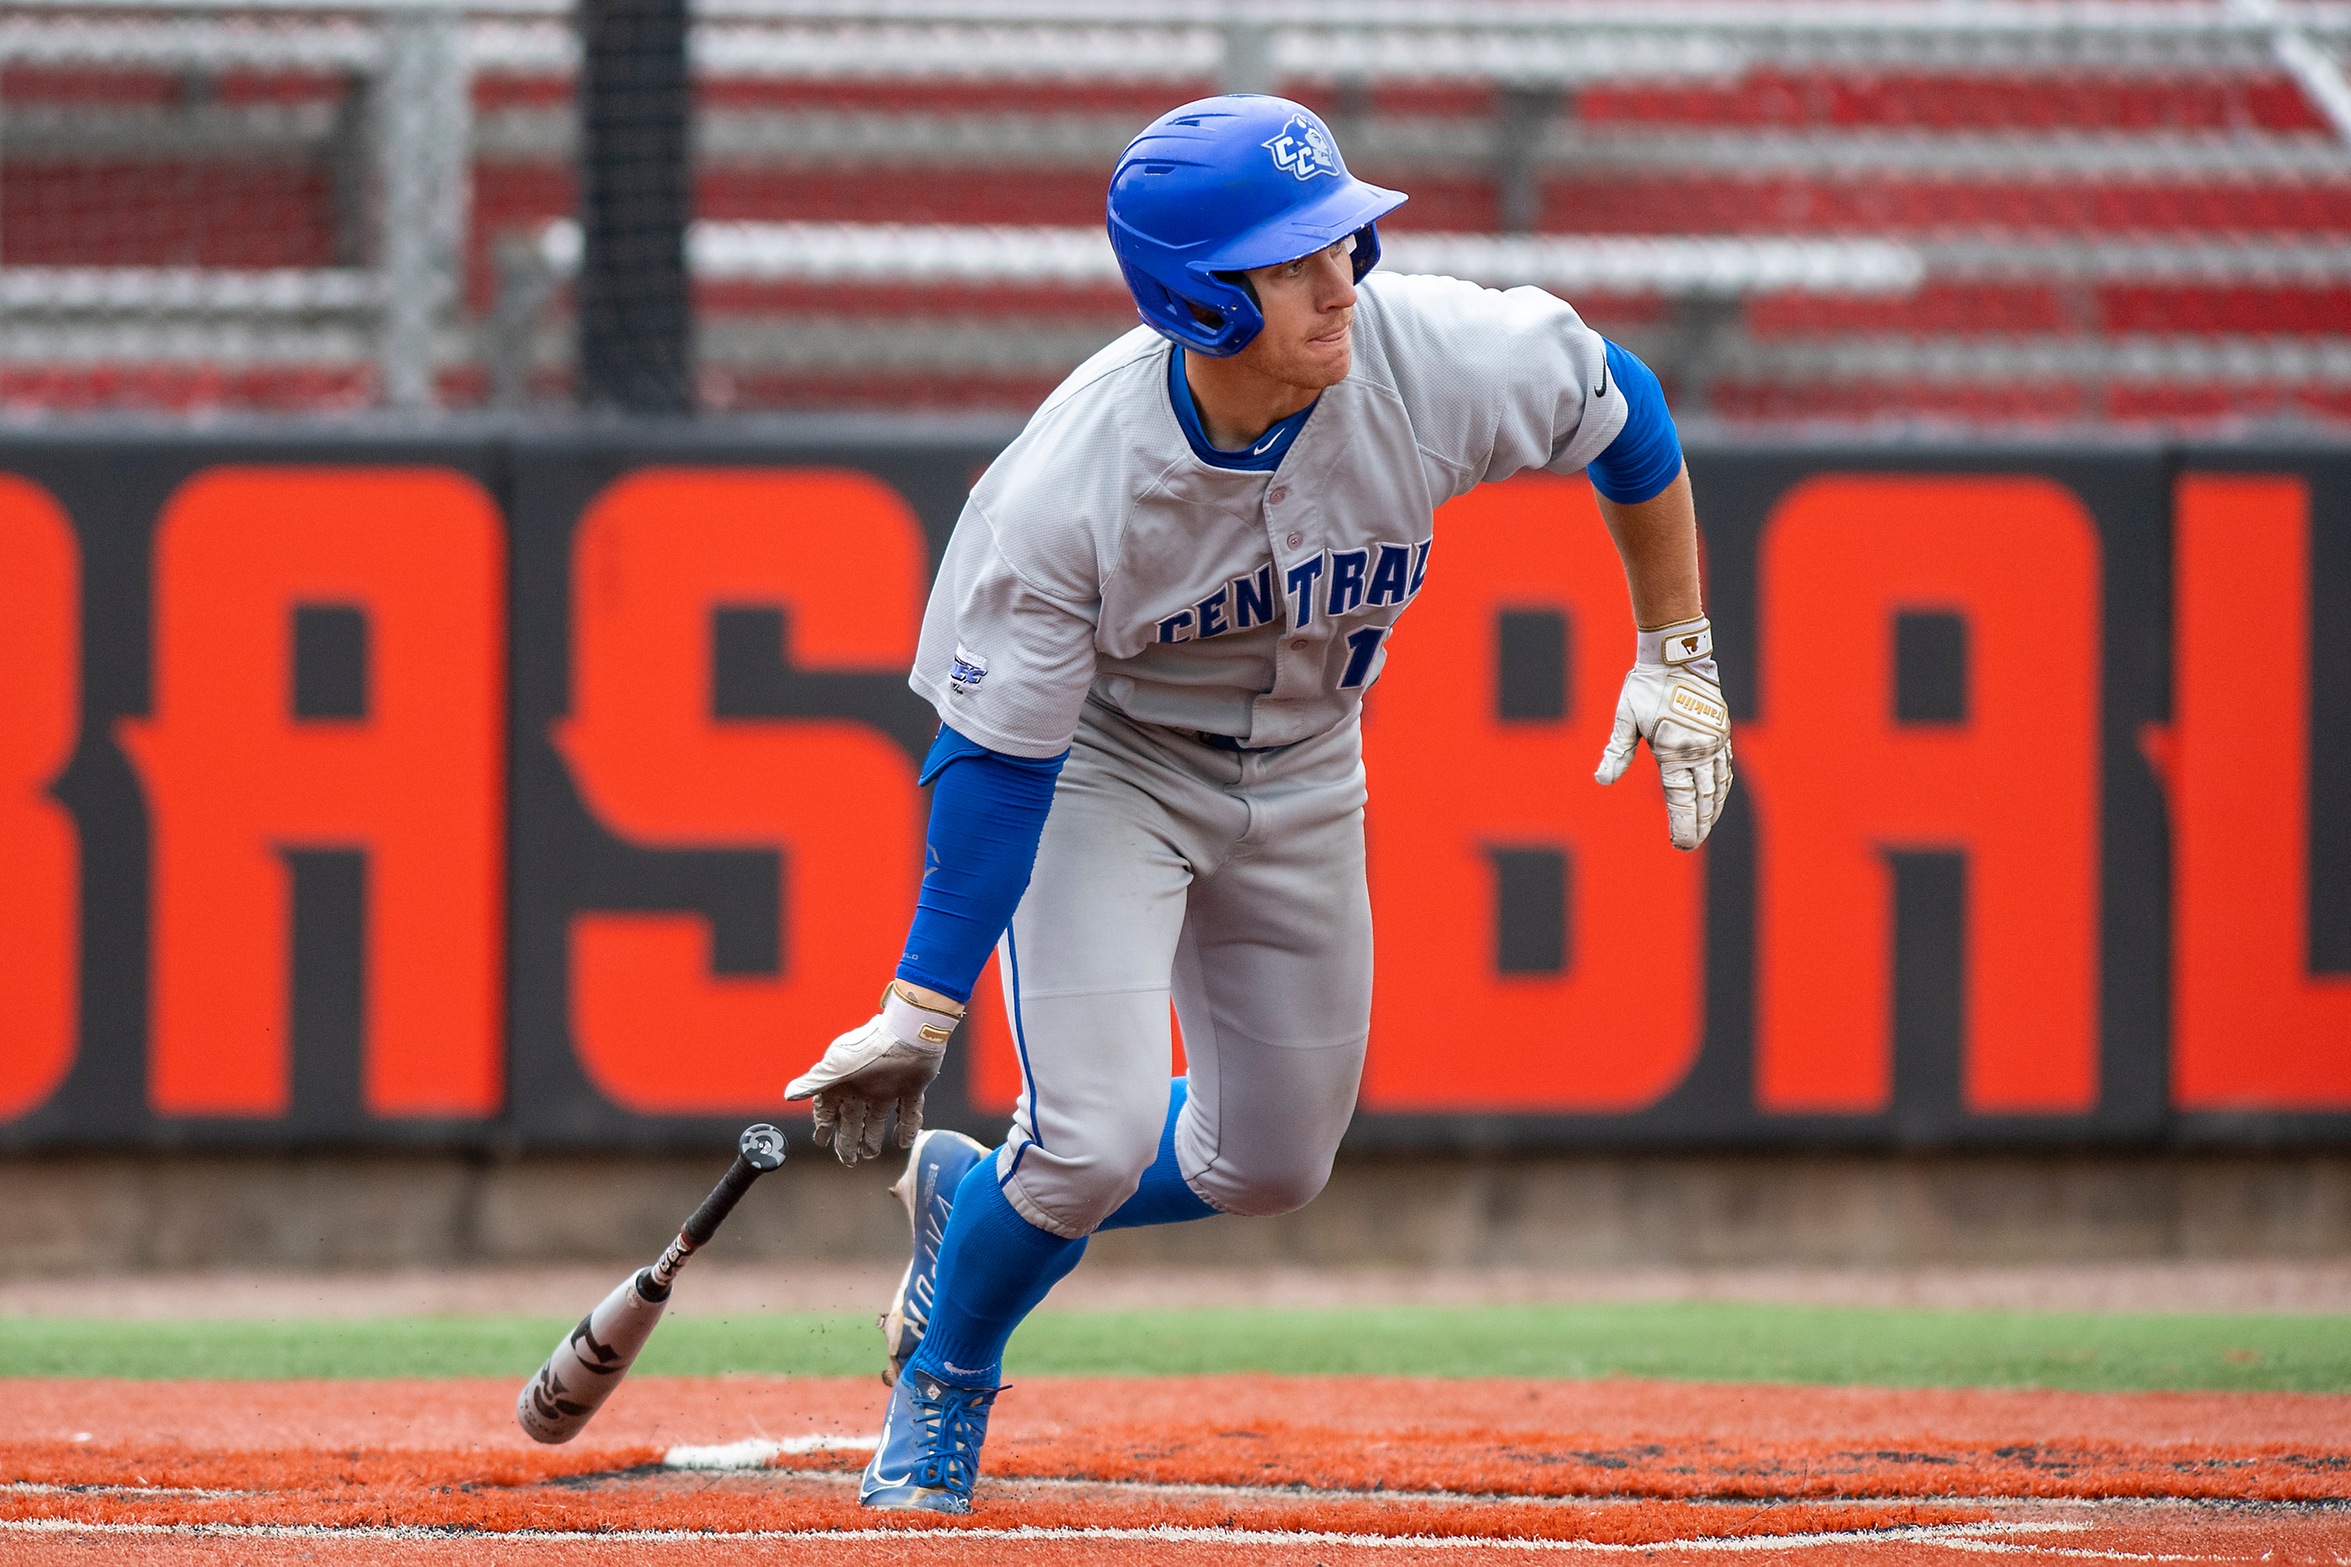 Hunter Pasqualini reached base four times and drove in two runs. (Steve McLaughlin Photography)